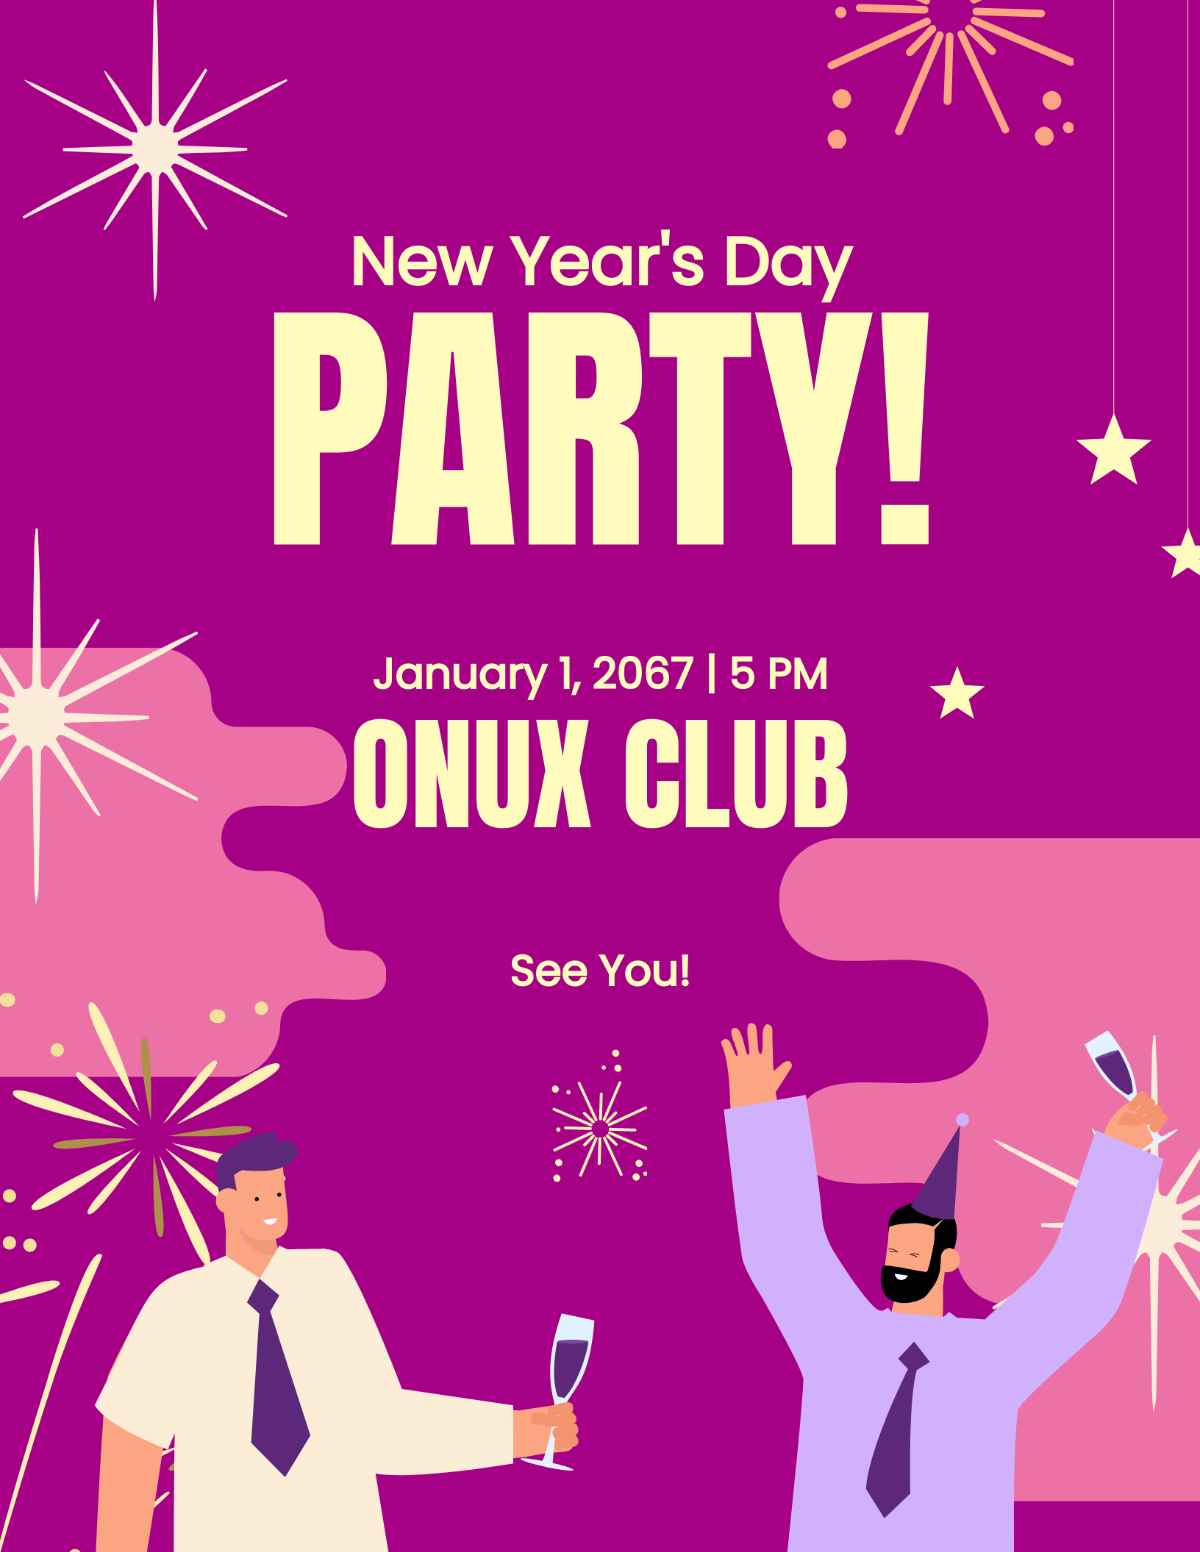 Party New Year's Day Flyer Template